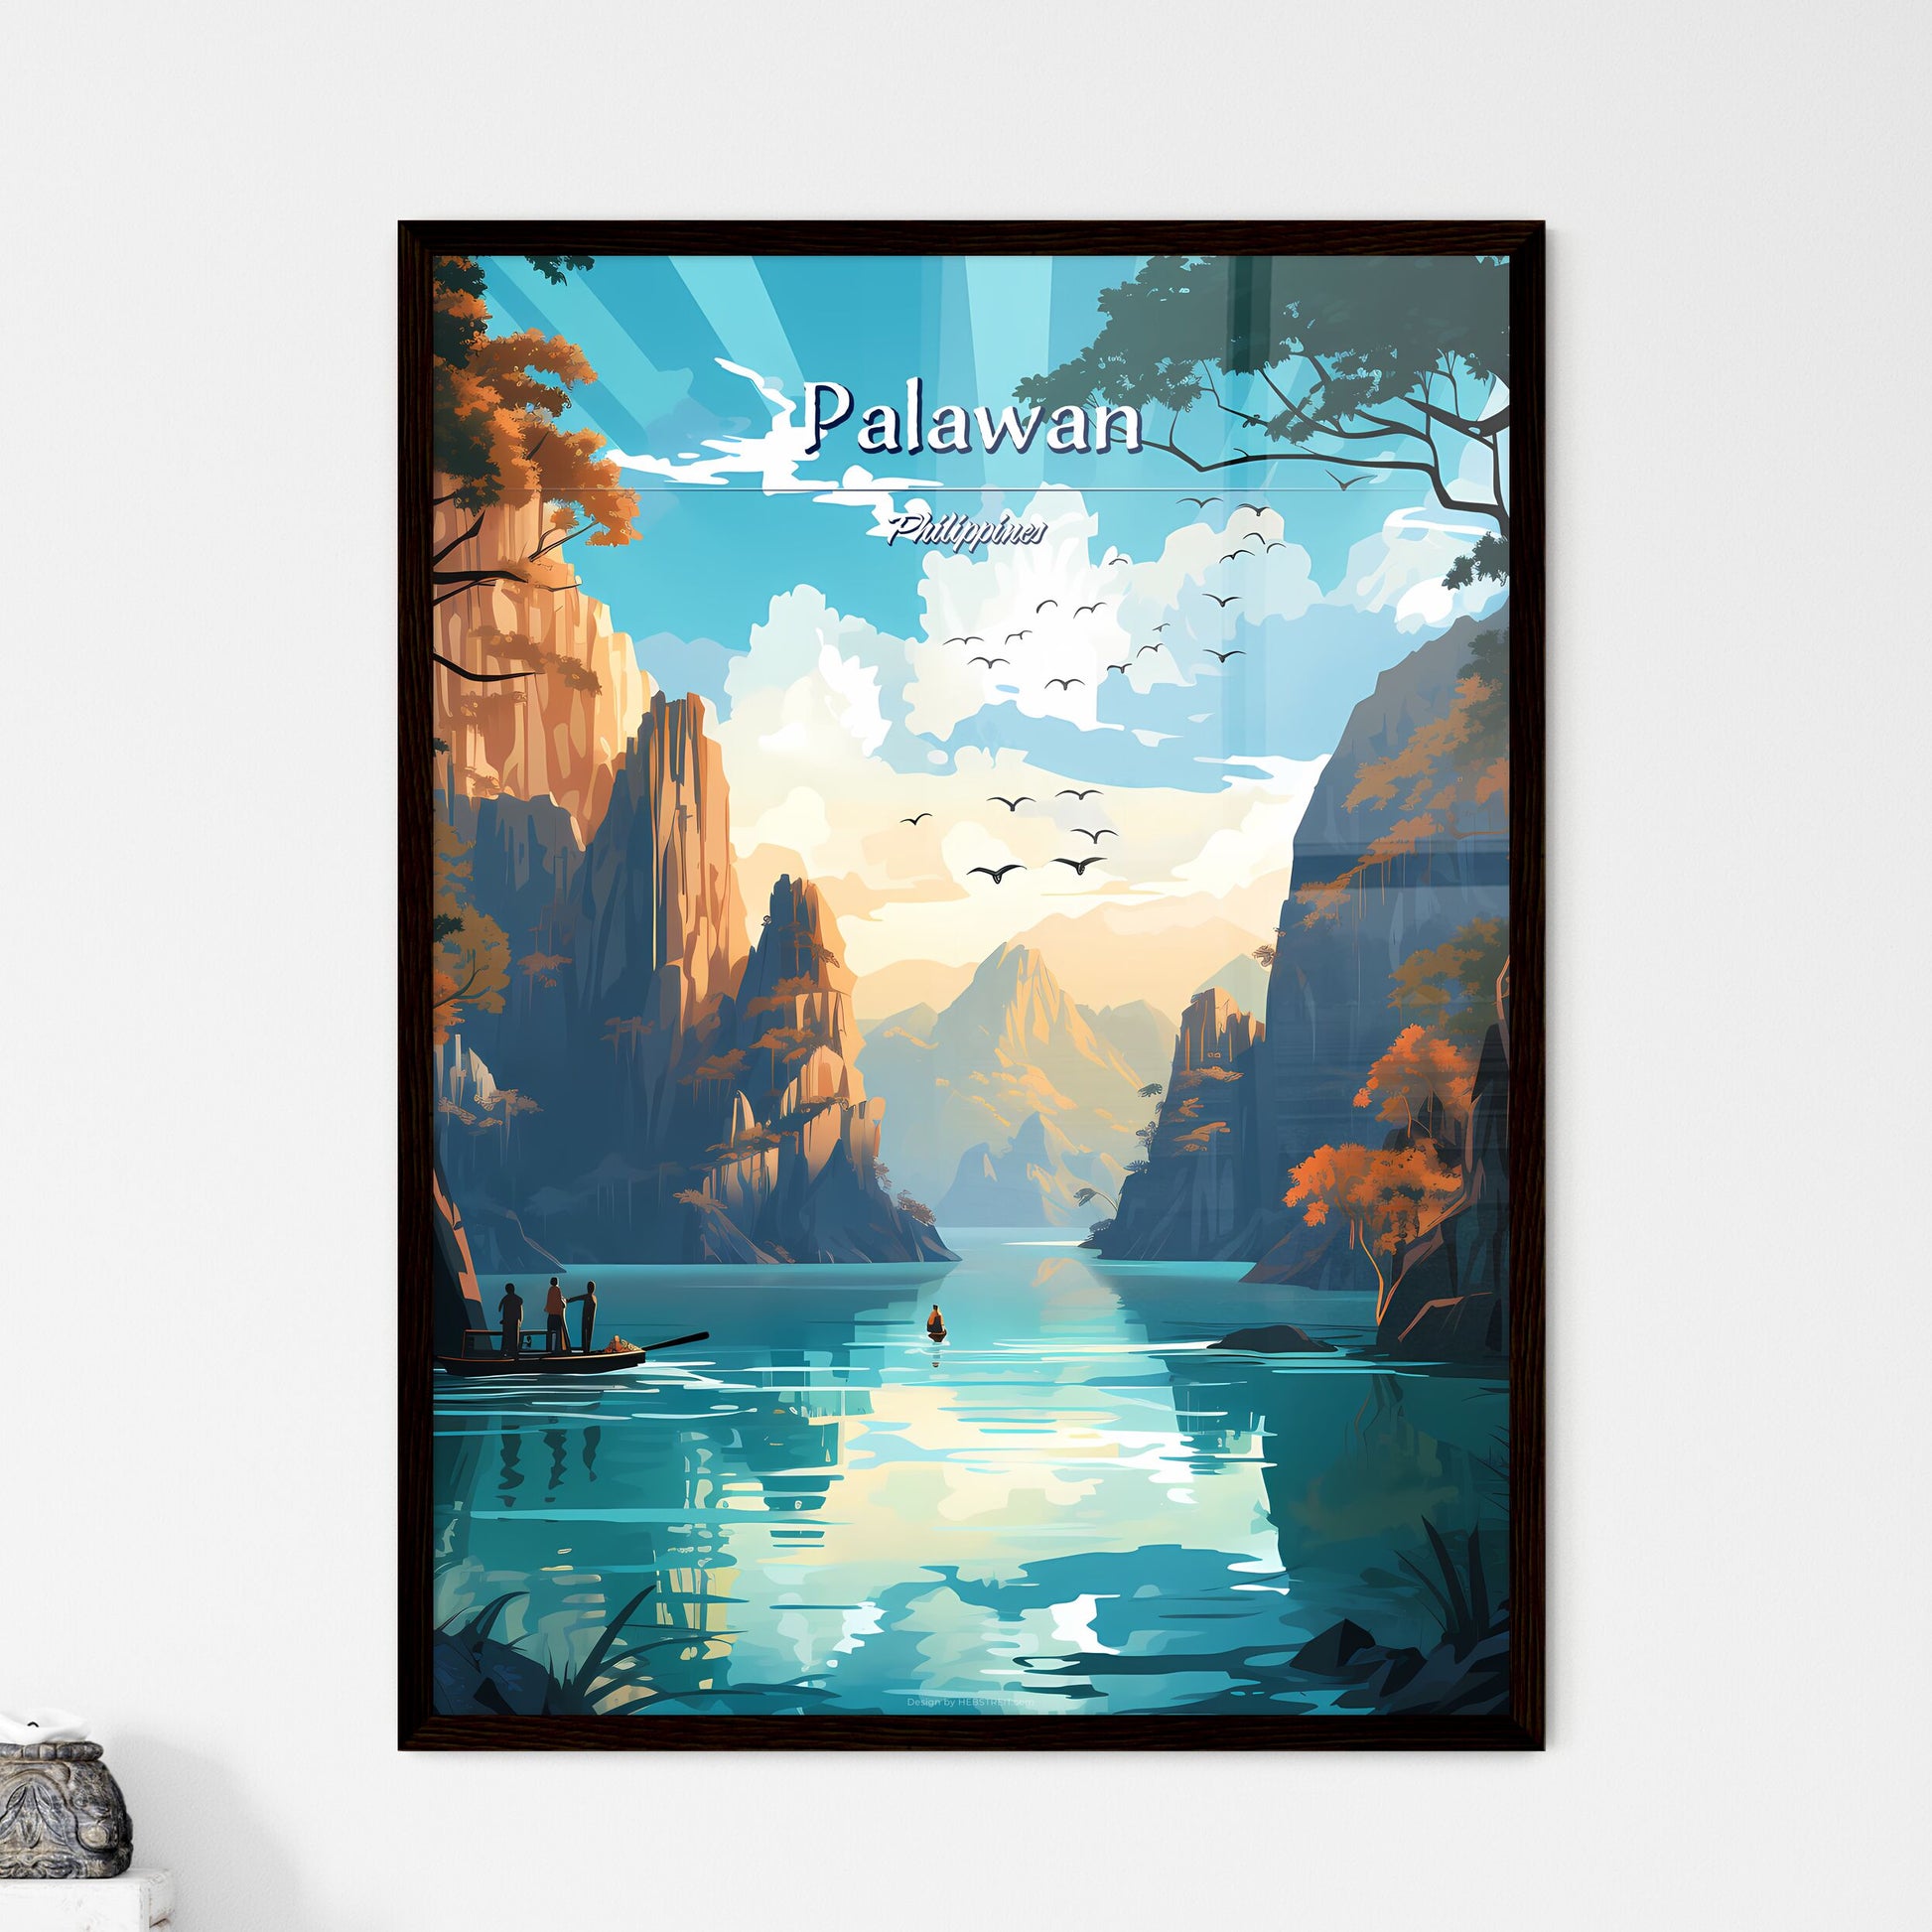 Palawan, Philippines - Art print of a painting of a river with mountains and trees Default Title